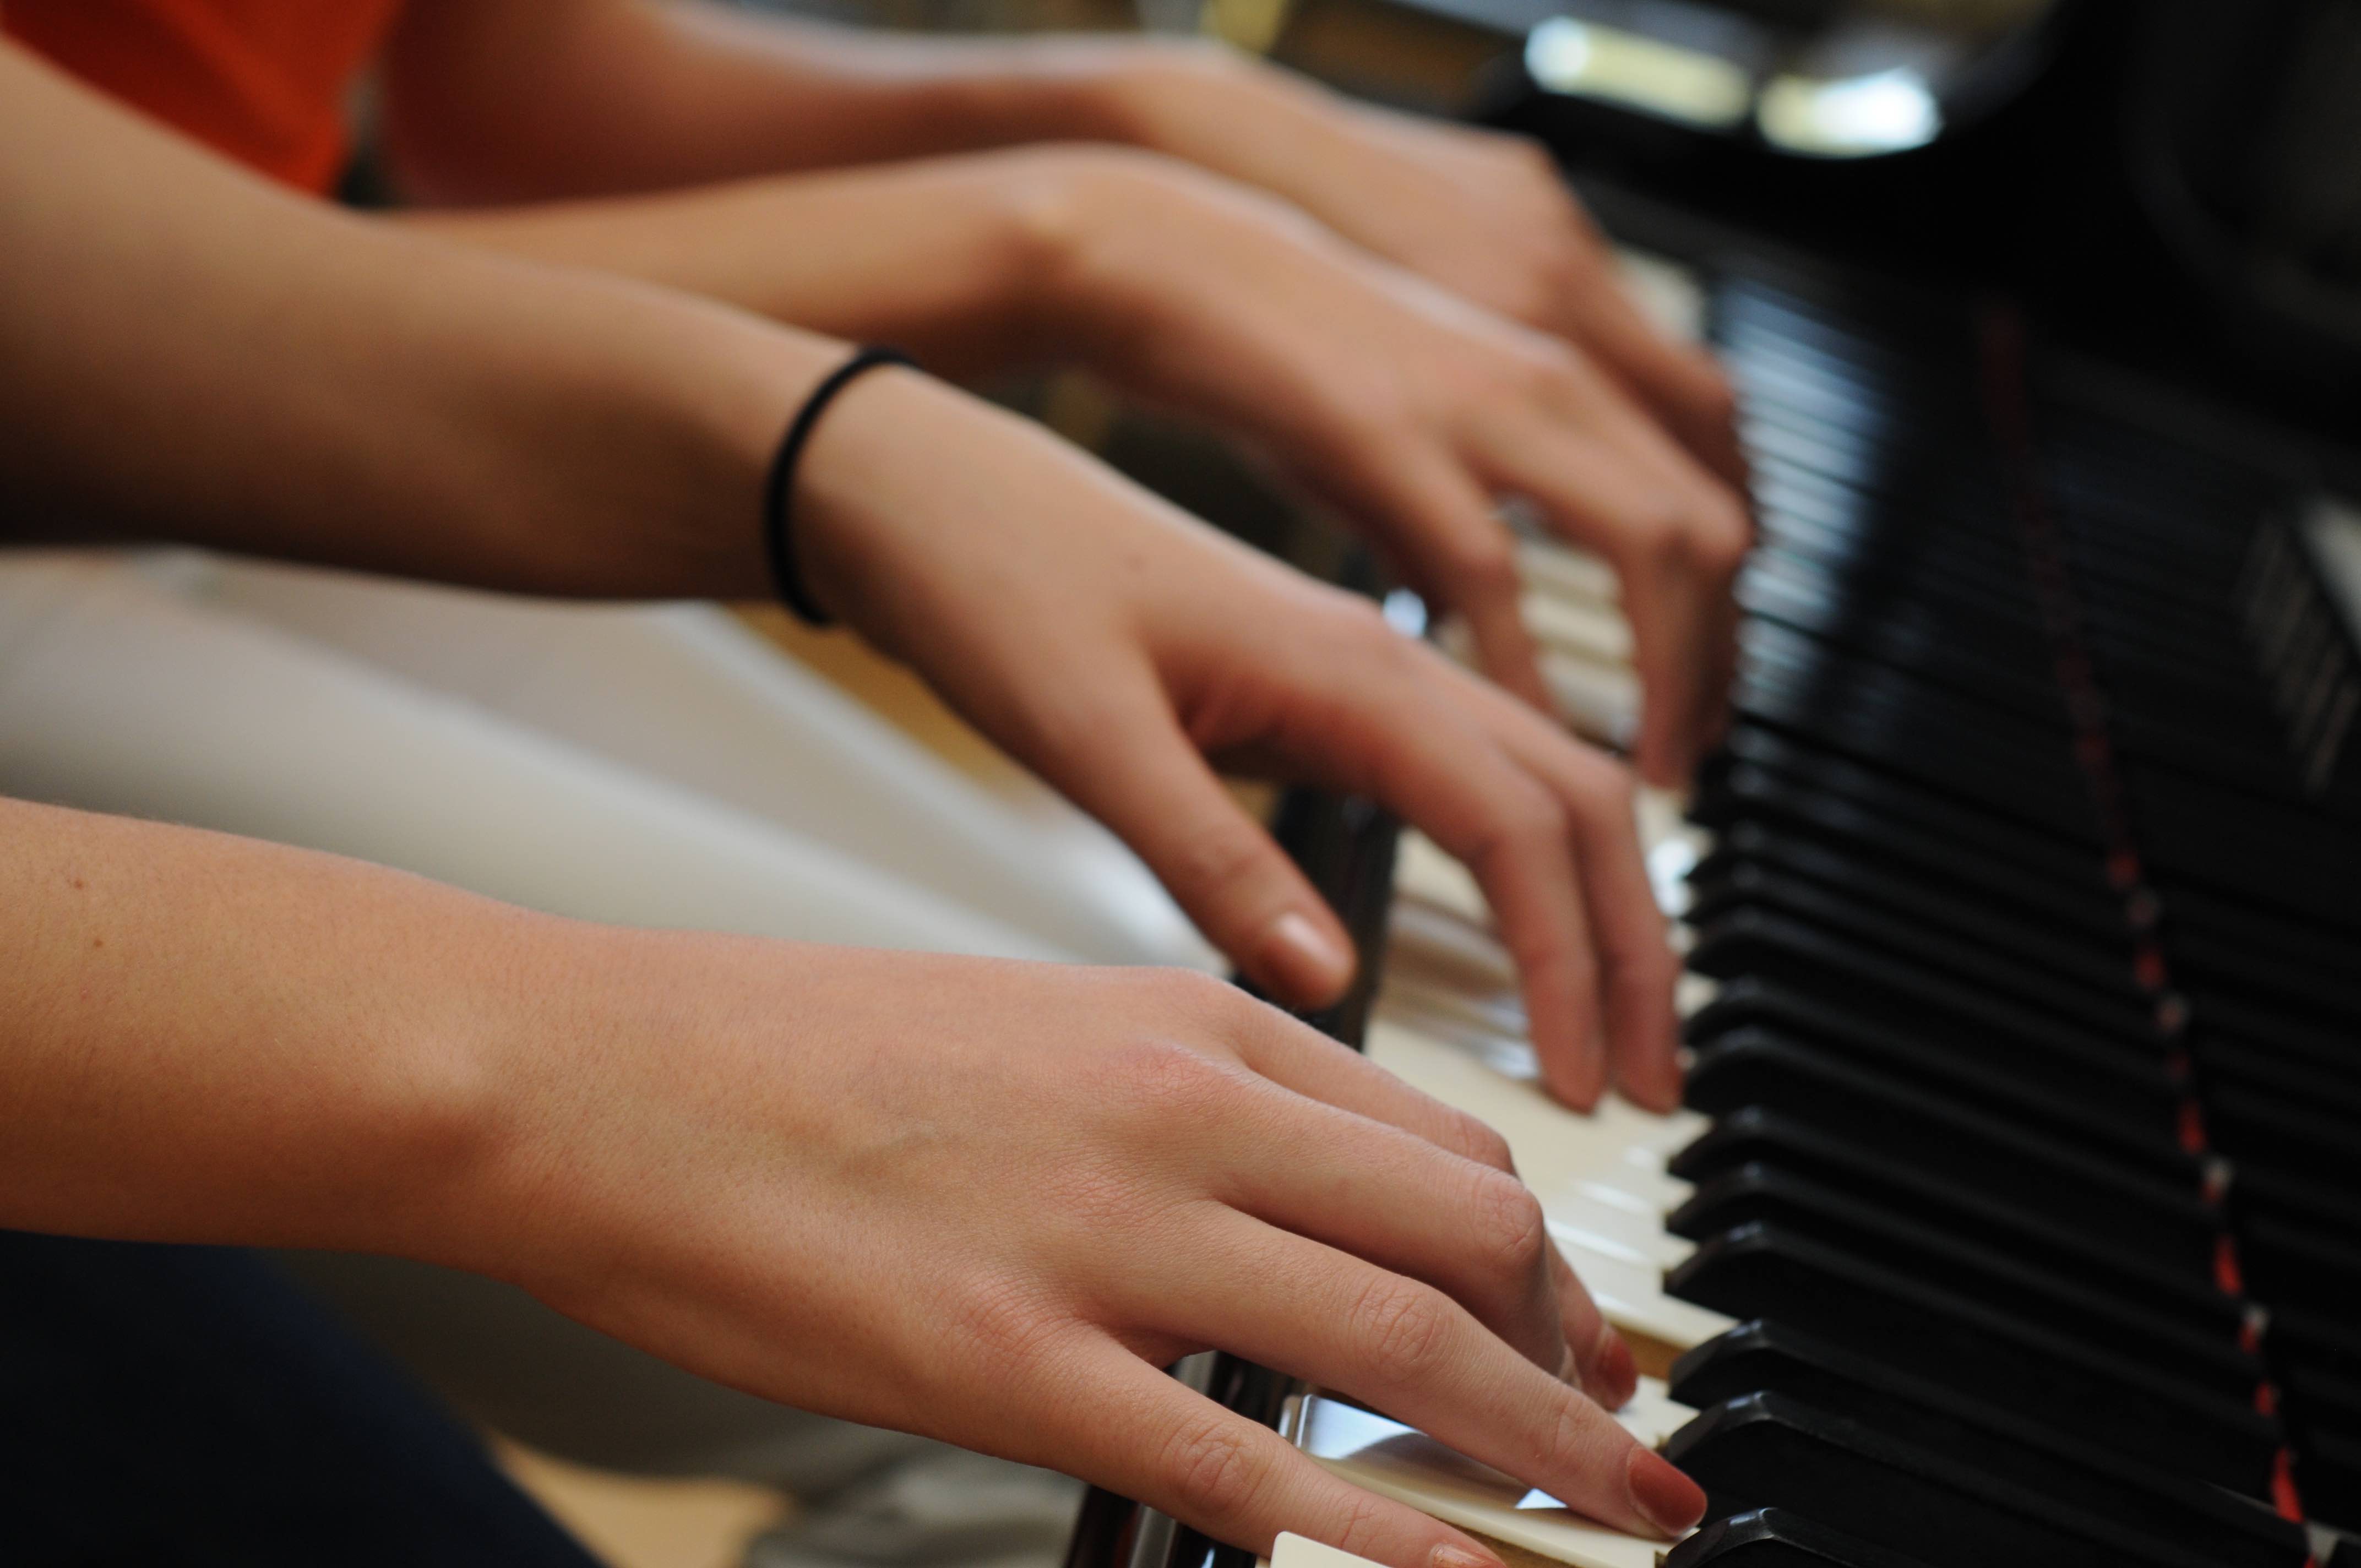 Hands on the piano keys